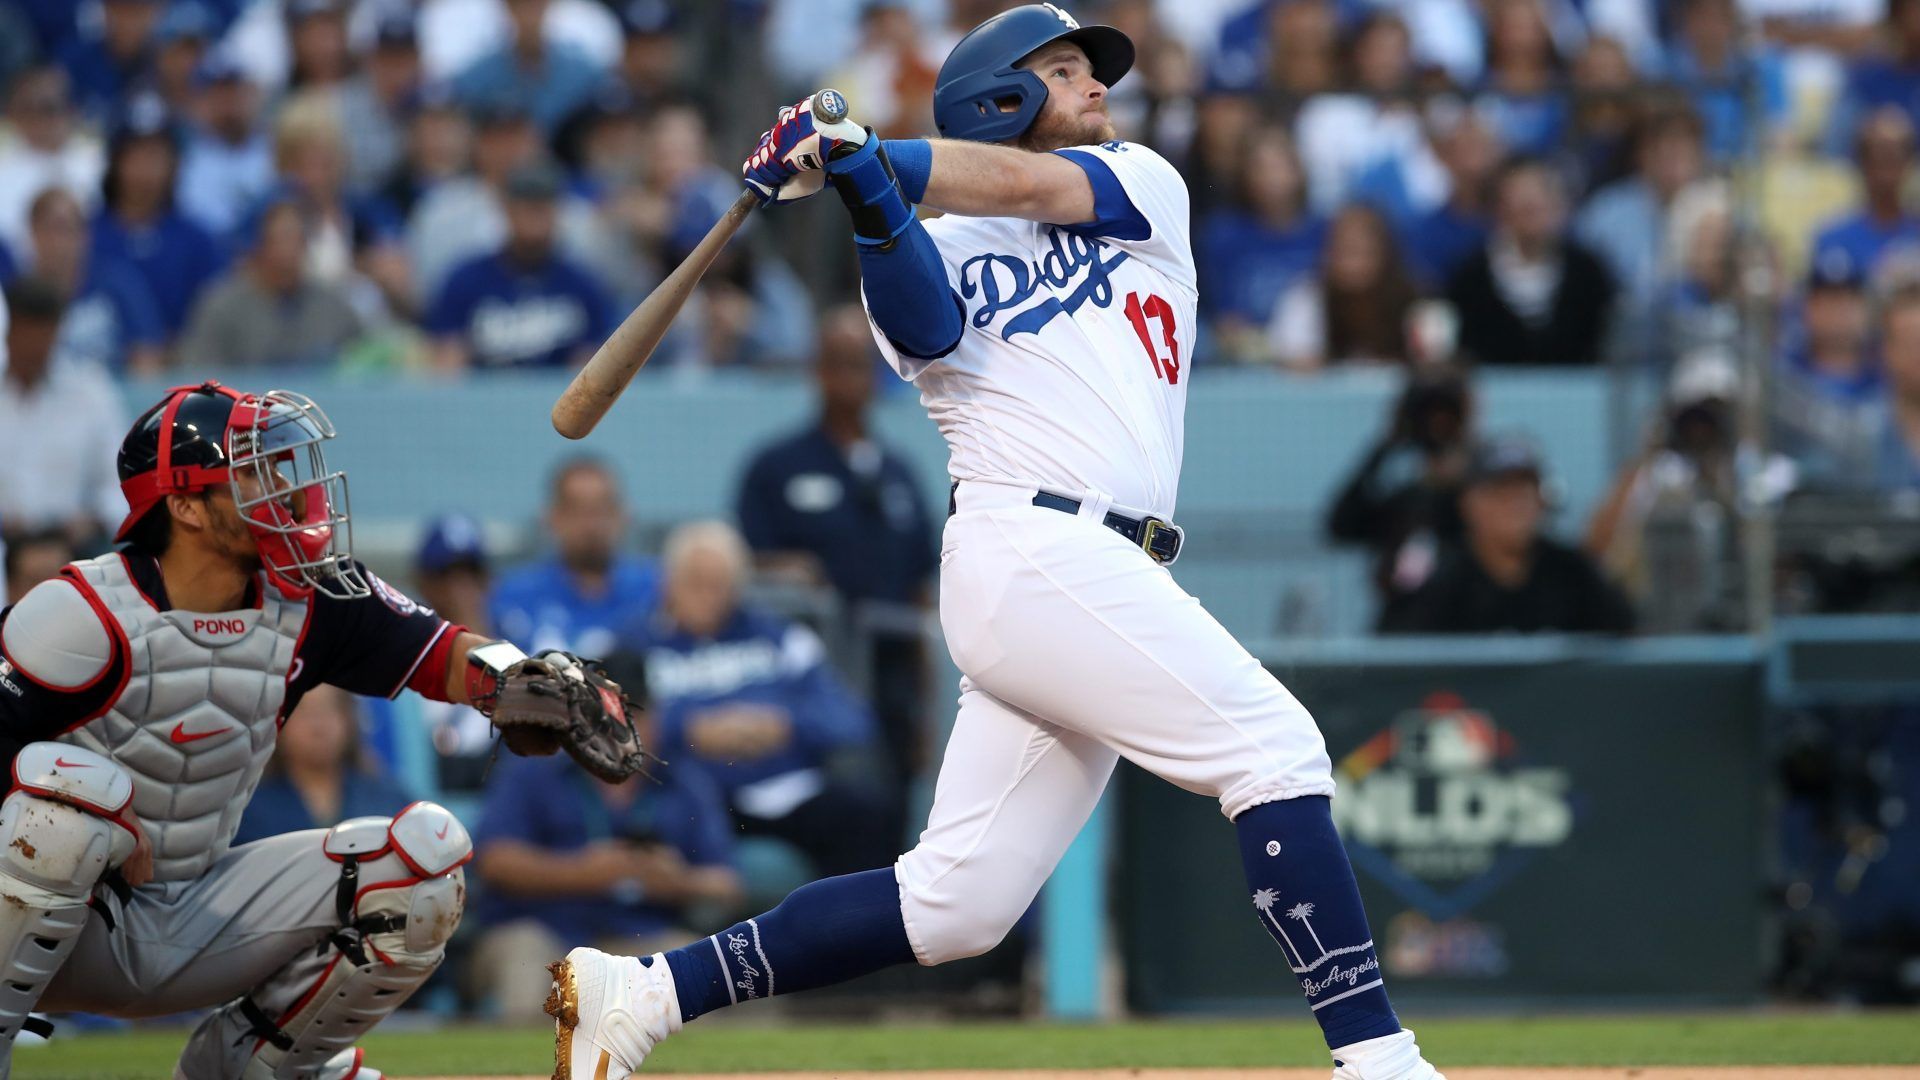 Max Muncy Swats Two Run Homer To Give Dodgers Early Lead In Game 5